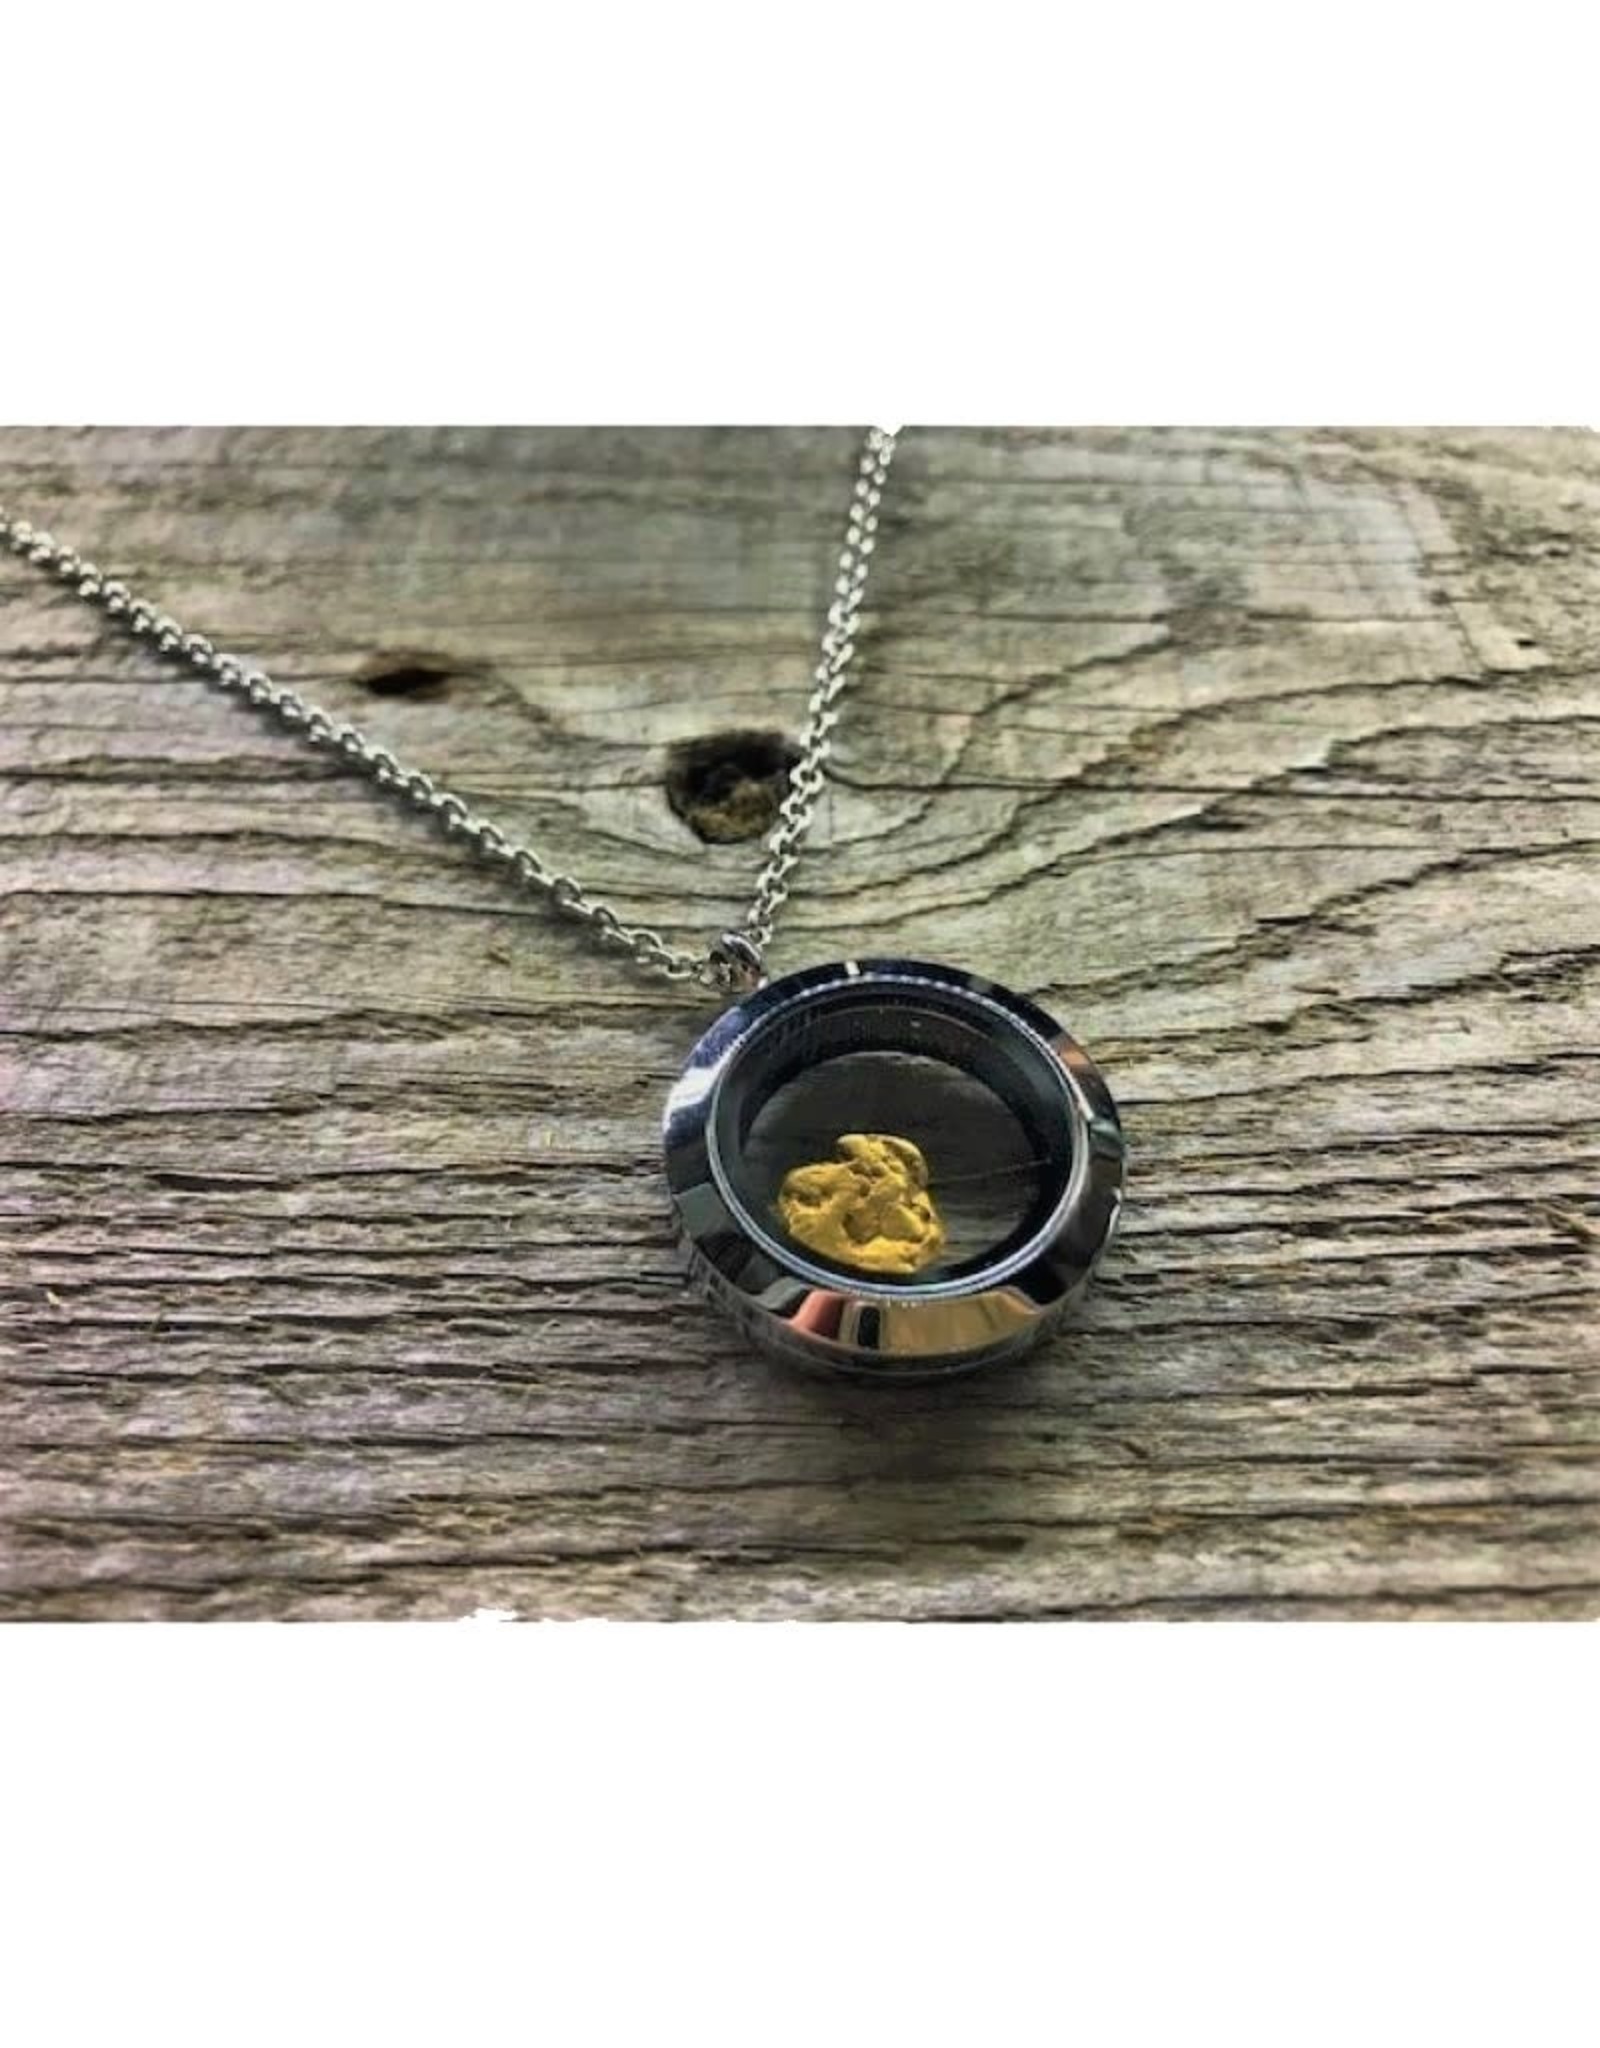 Mining Necklace - Gold Nugget in Sterling Silver 19 grains